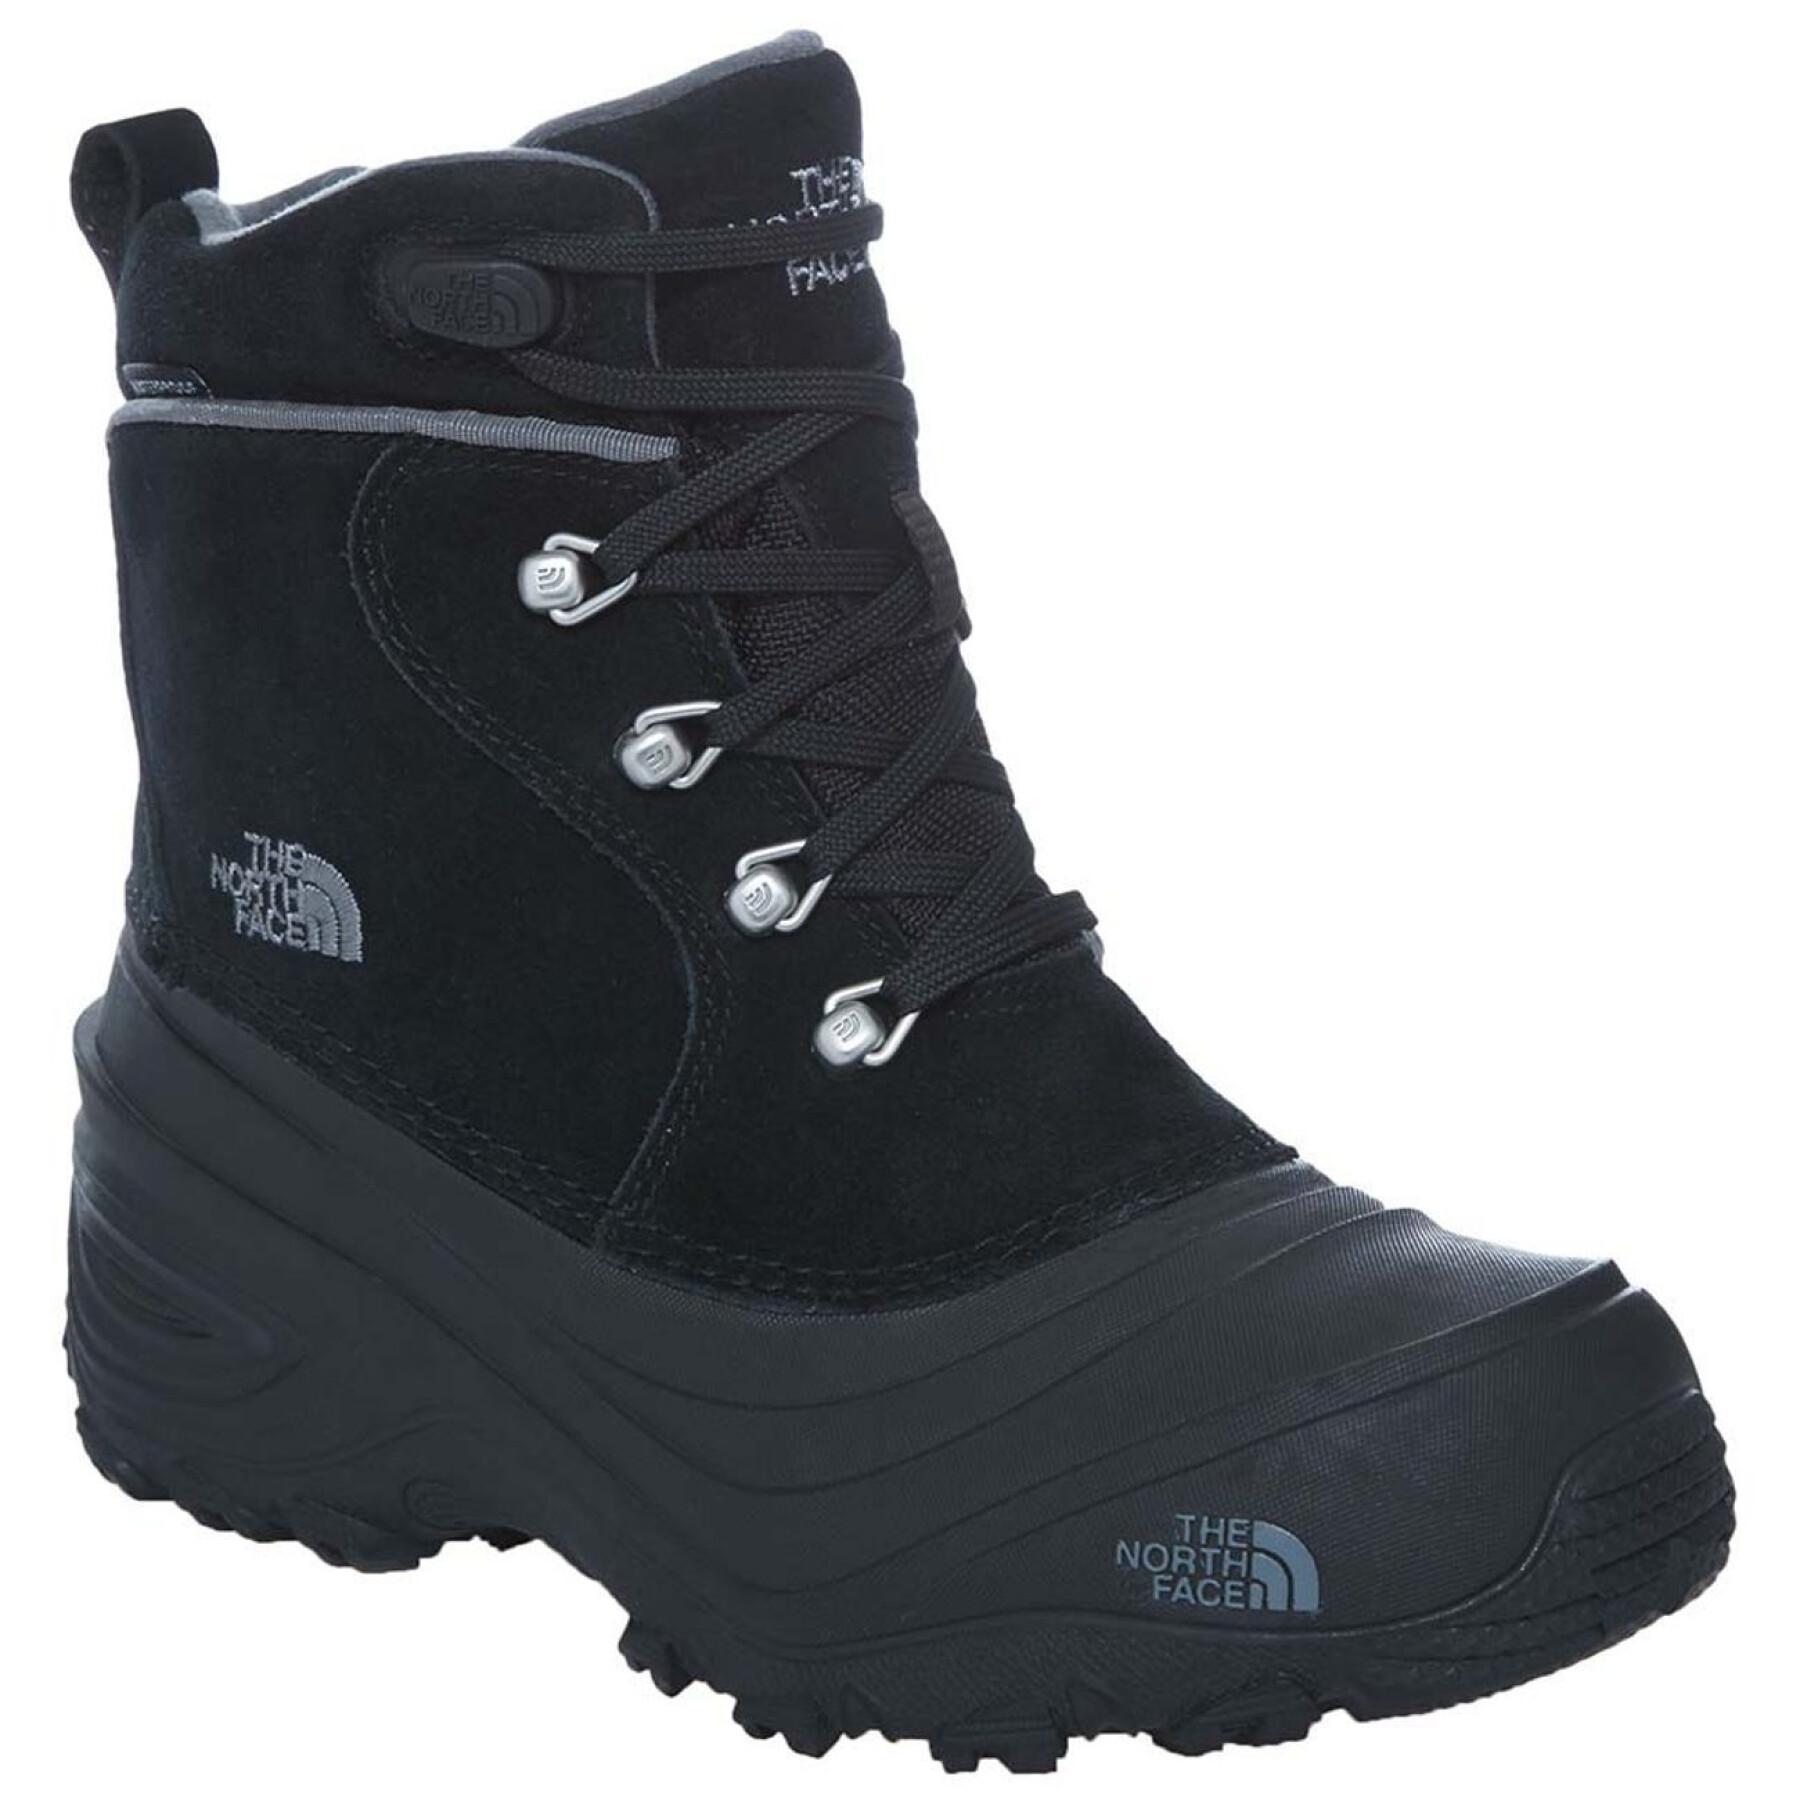 Bottines femme The North Face Chilkat II